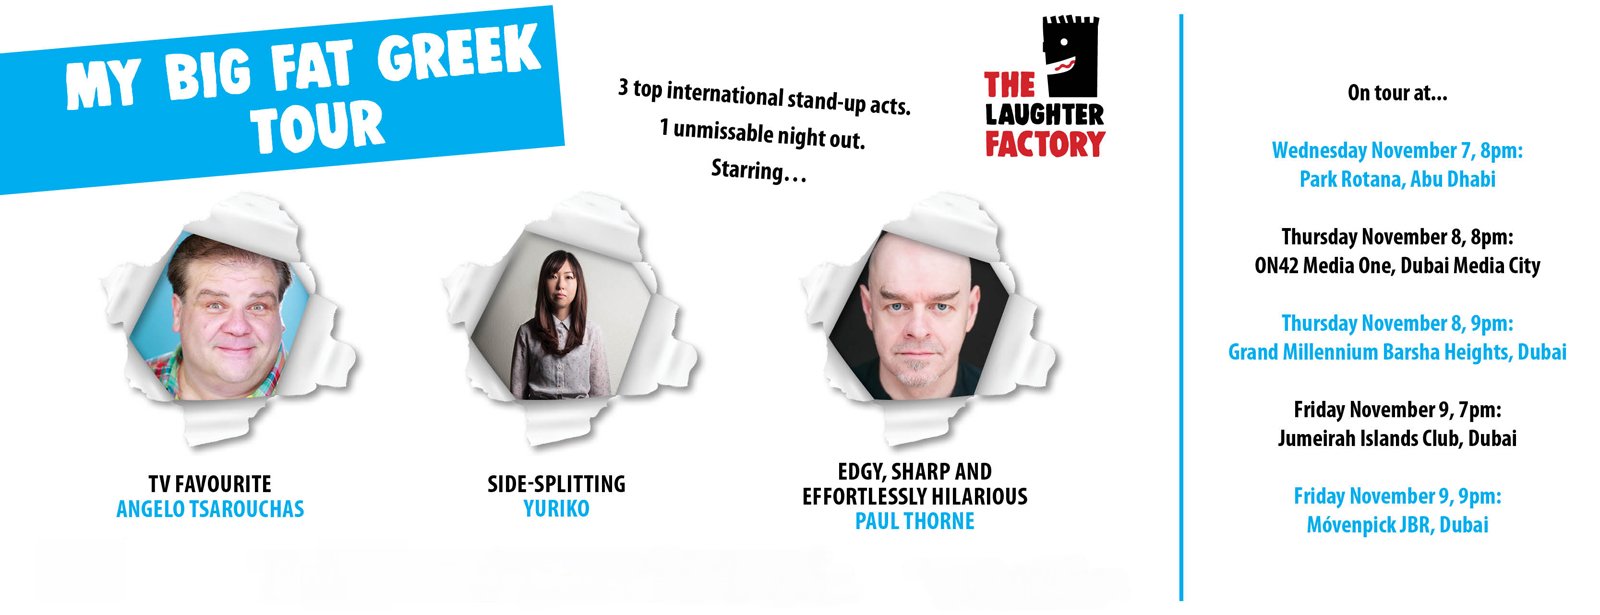 My Big Fat Greek Tour – The Laughter Factory - Coming Soon in UAE